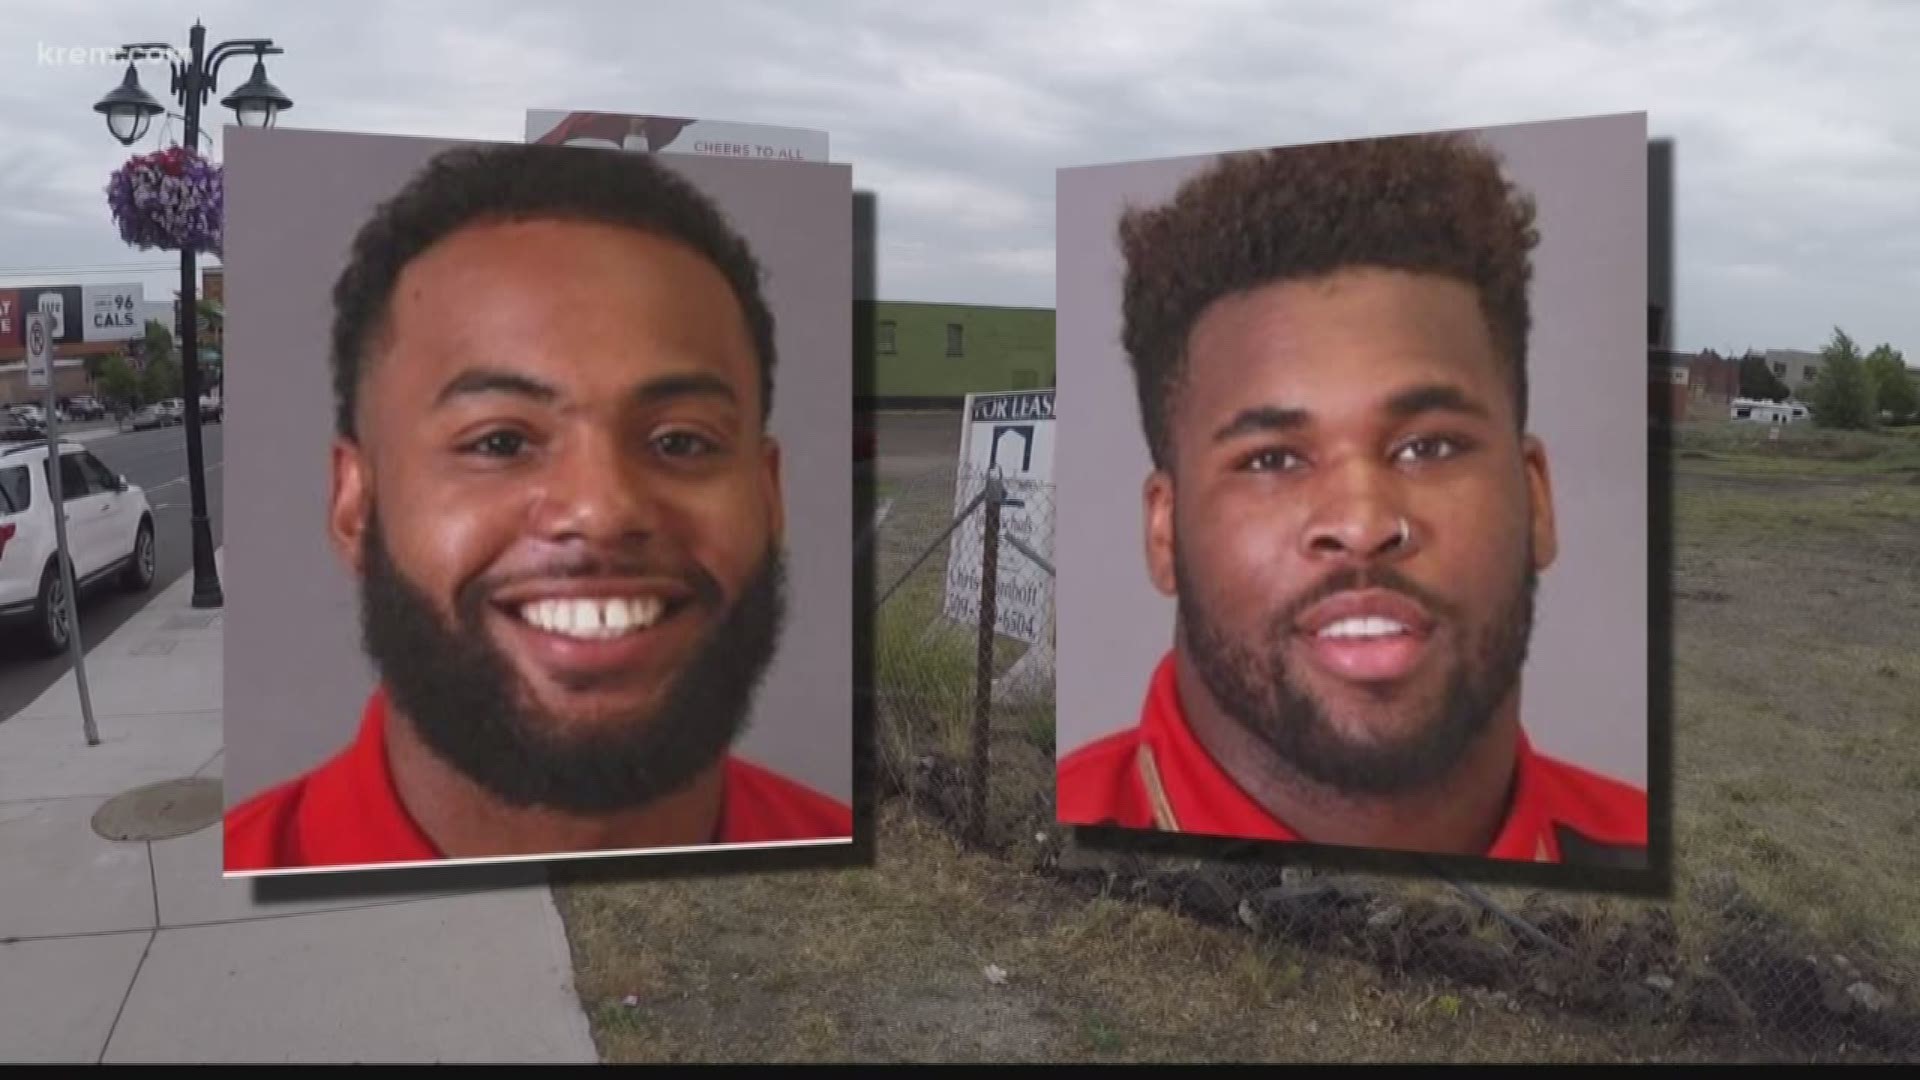 For the first time, we're hearing from those close to a pair of Eastern Washington University football players shot and injured at a downtown Spokane bar over the weekend.